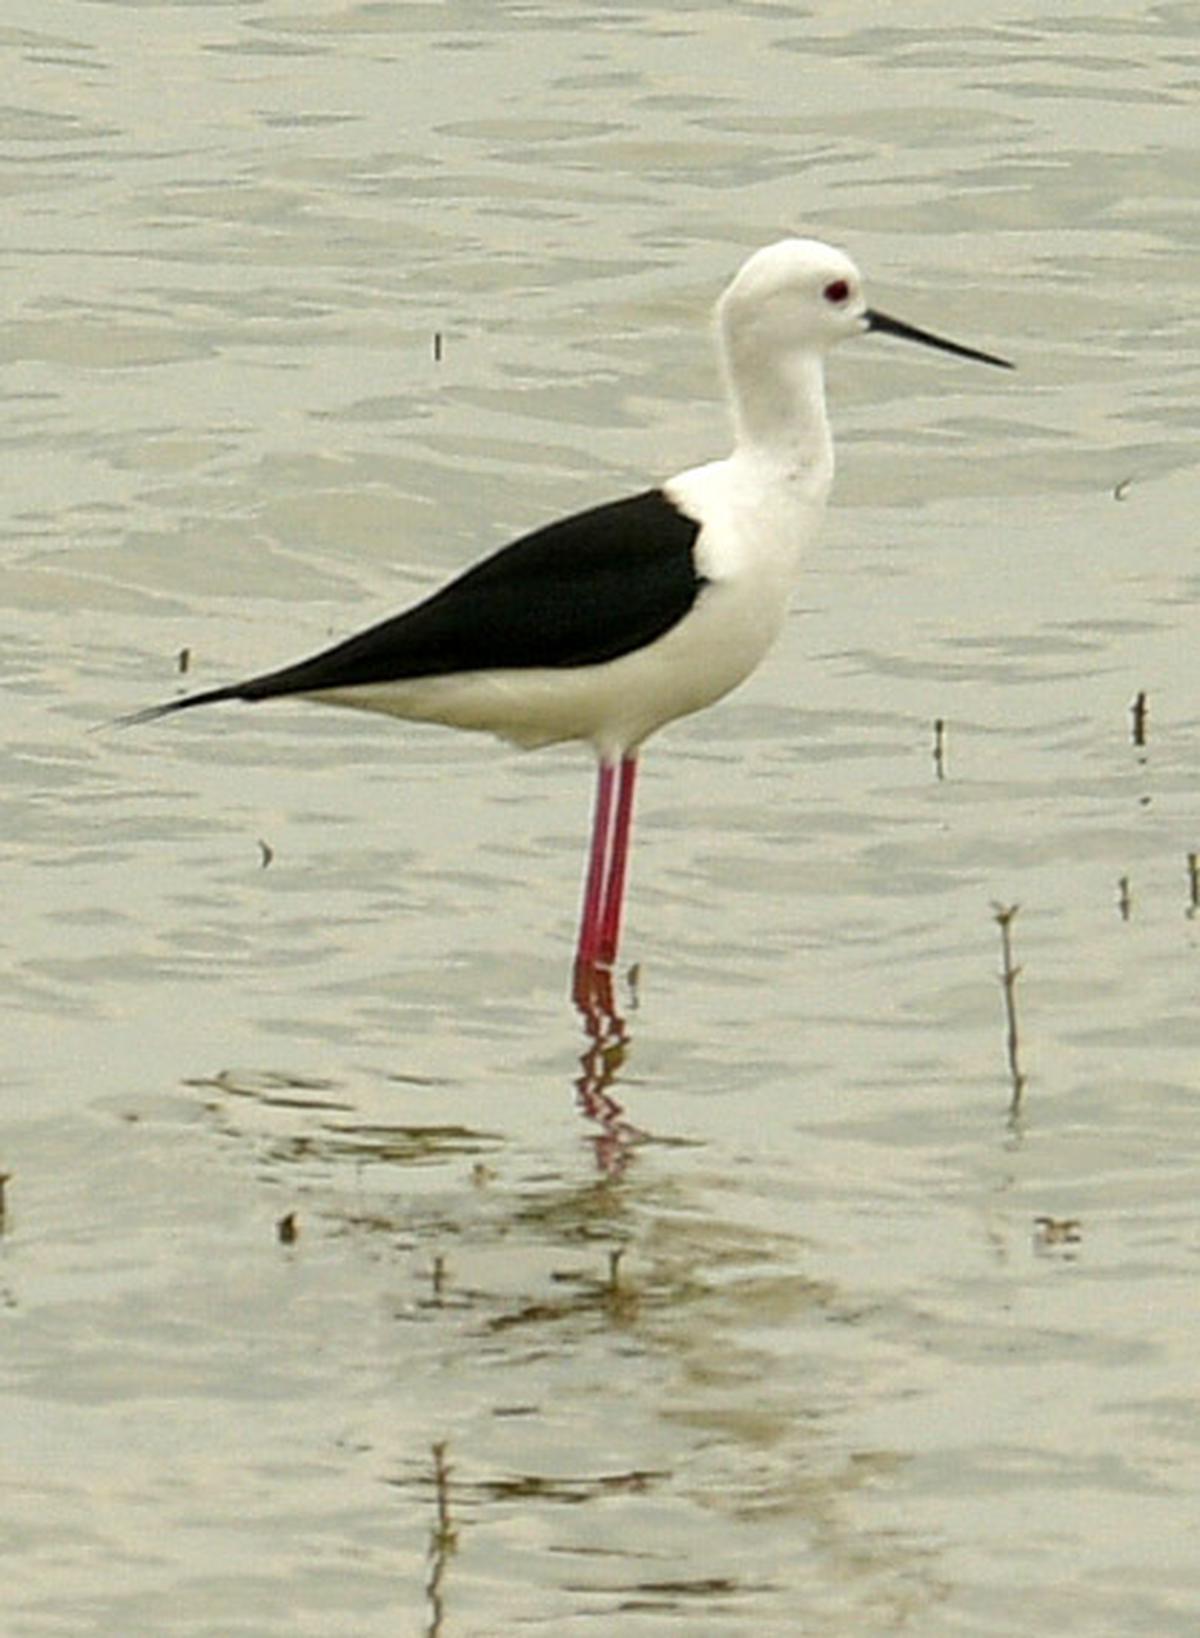 Black-winged Stilt, found in a wide range acrossÂ Europe, Africa, Asia, and Australia, spotted at Karaivetti Bird Sancutary.